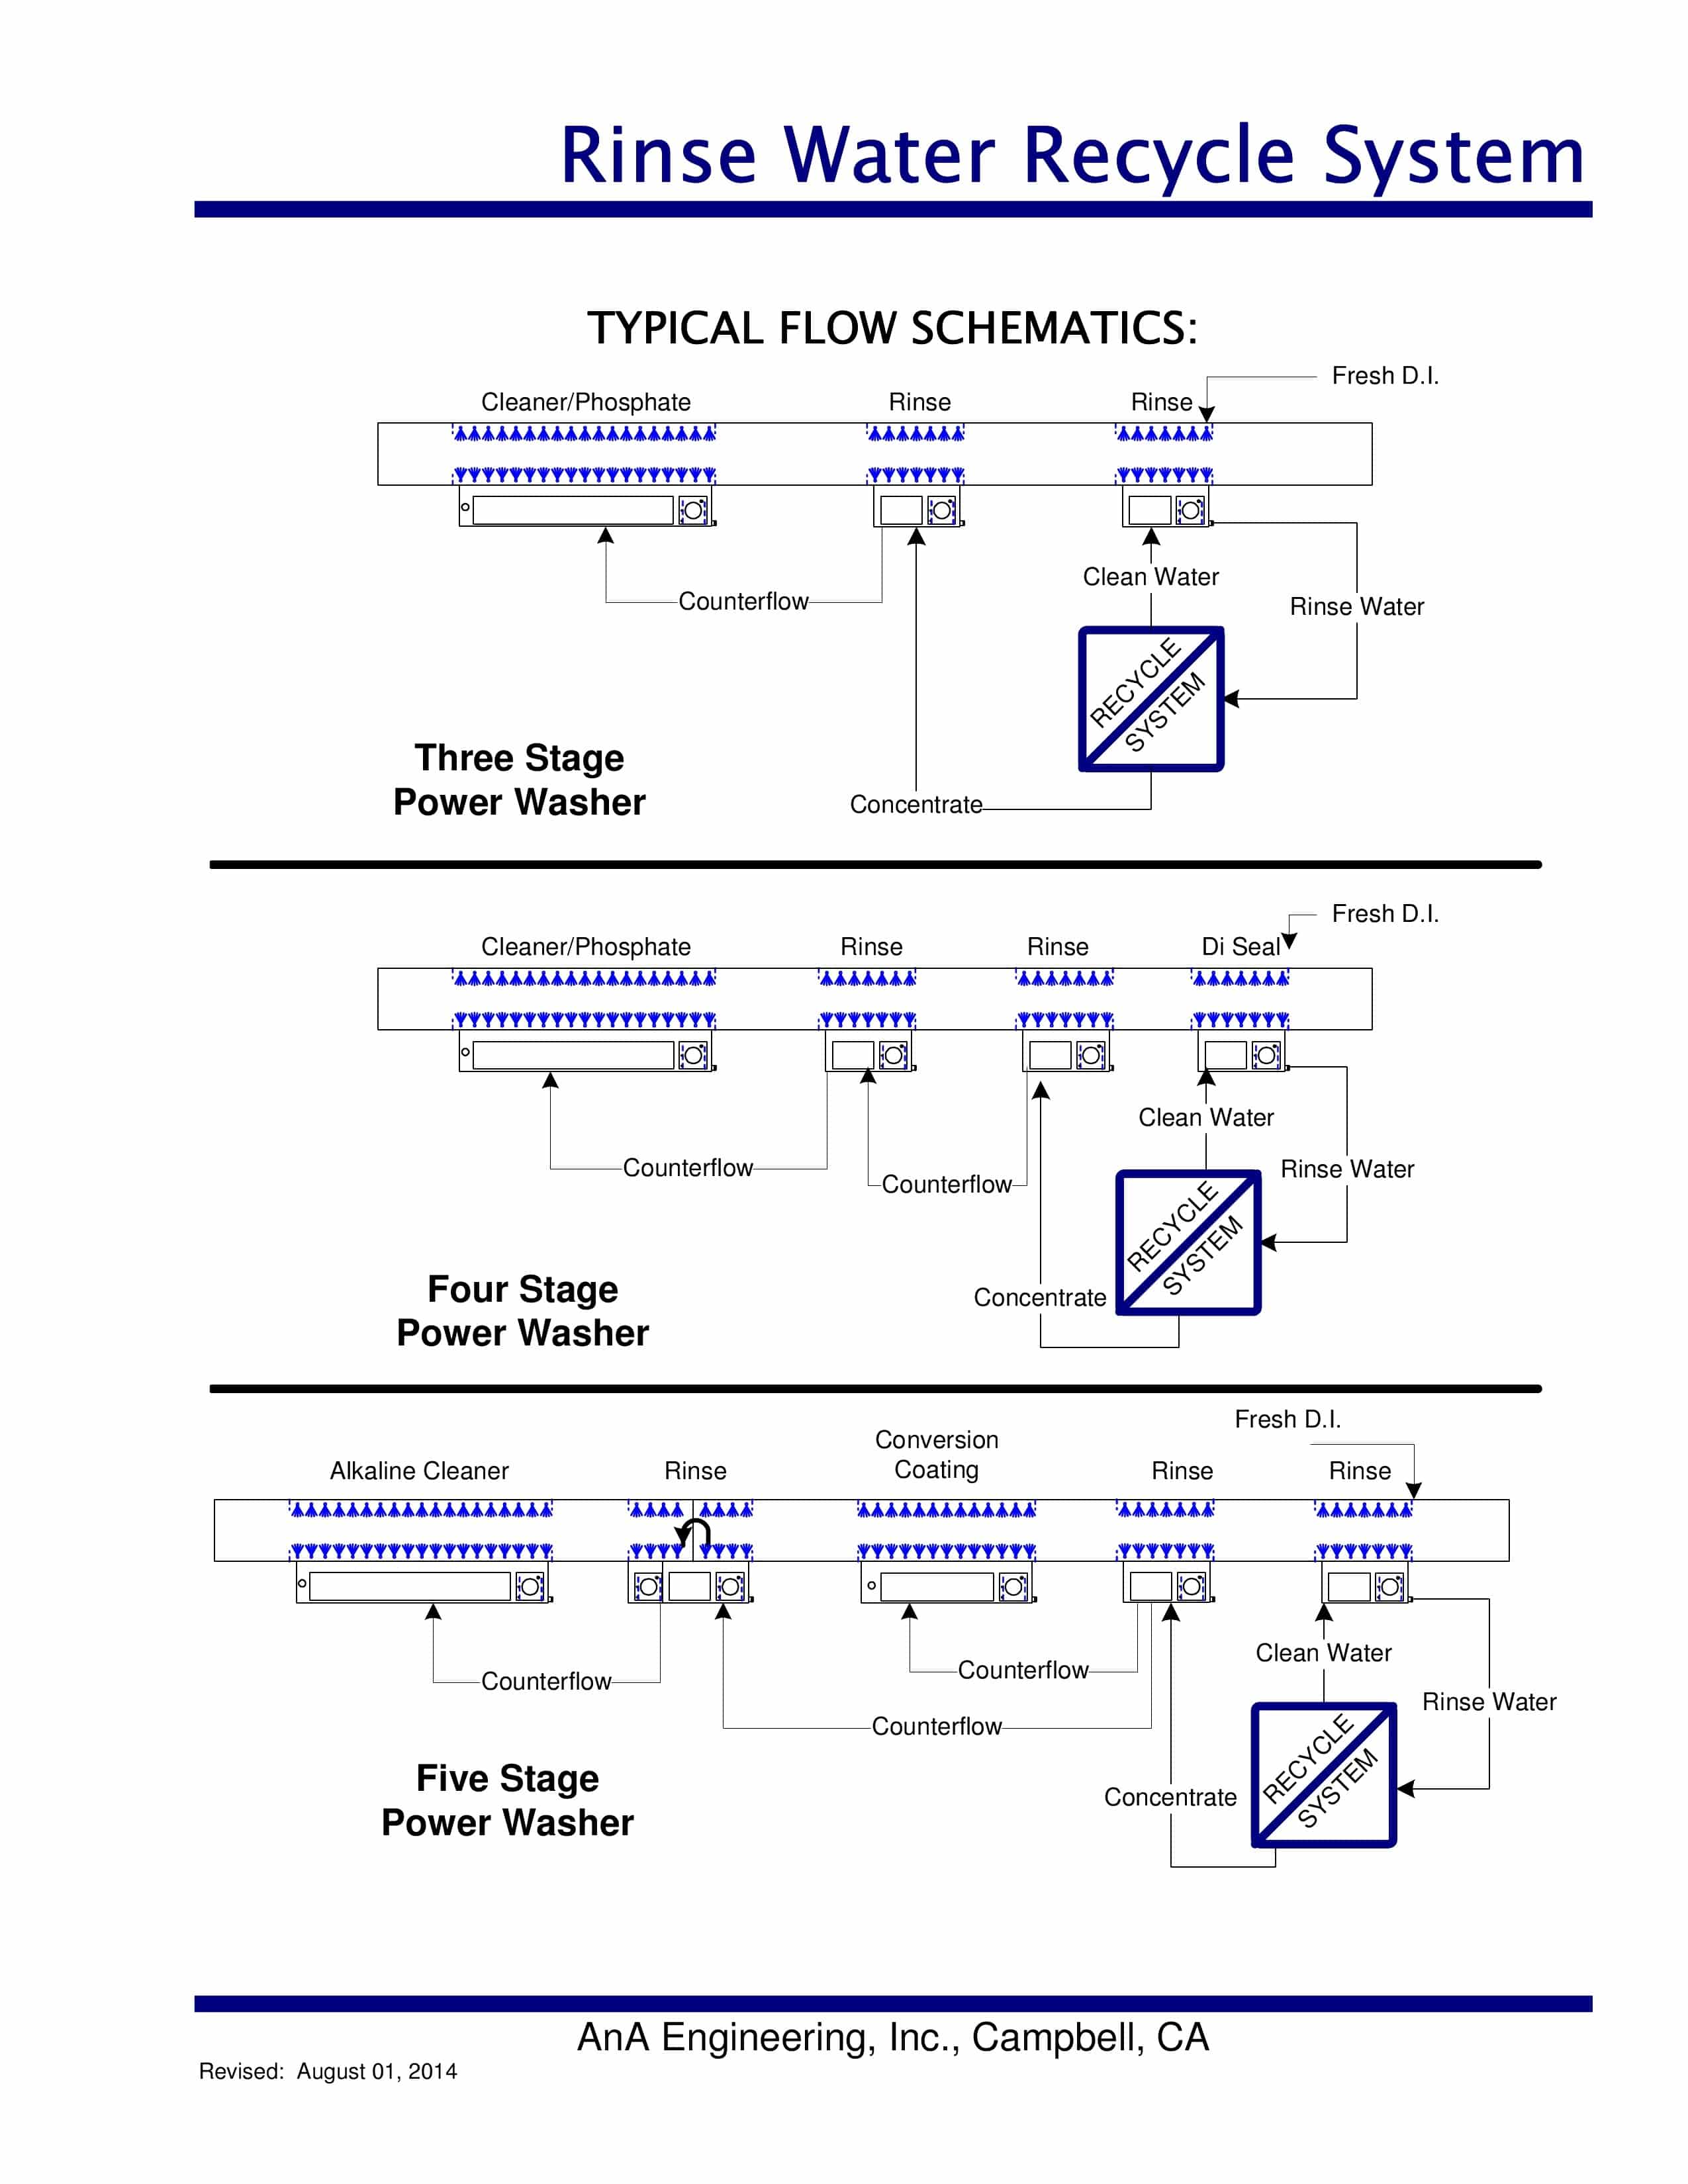 Rinse Water Recycling Schematic